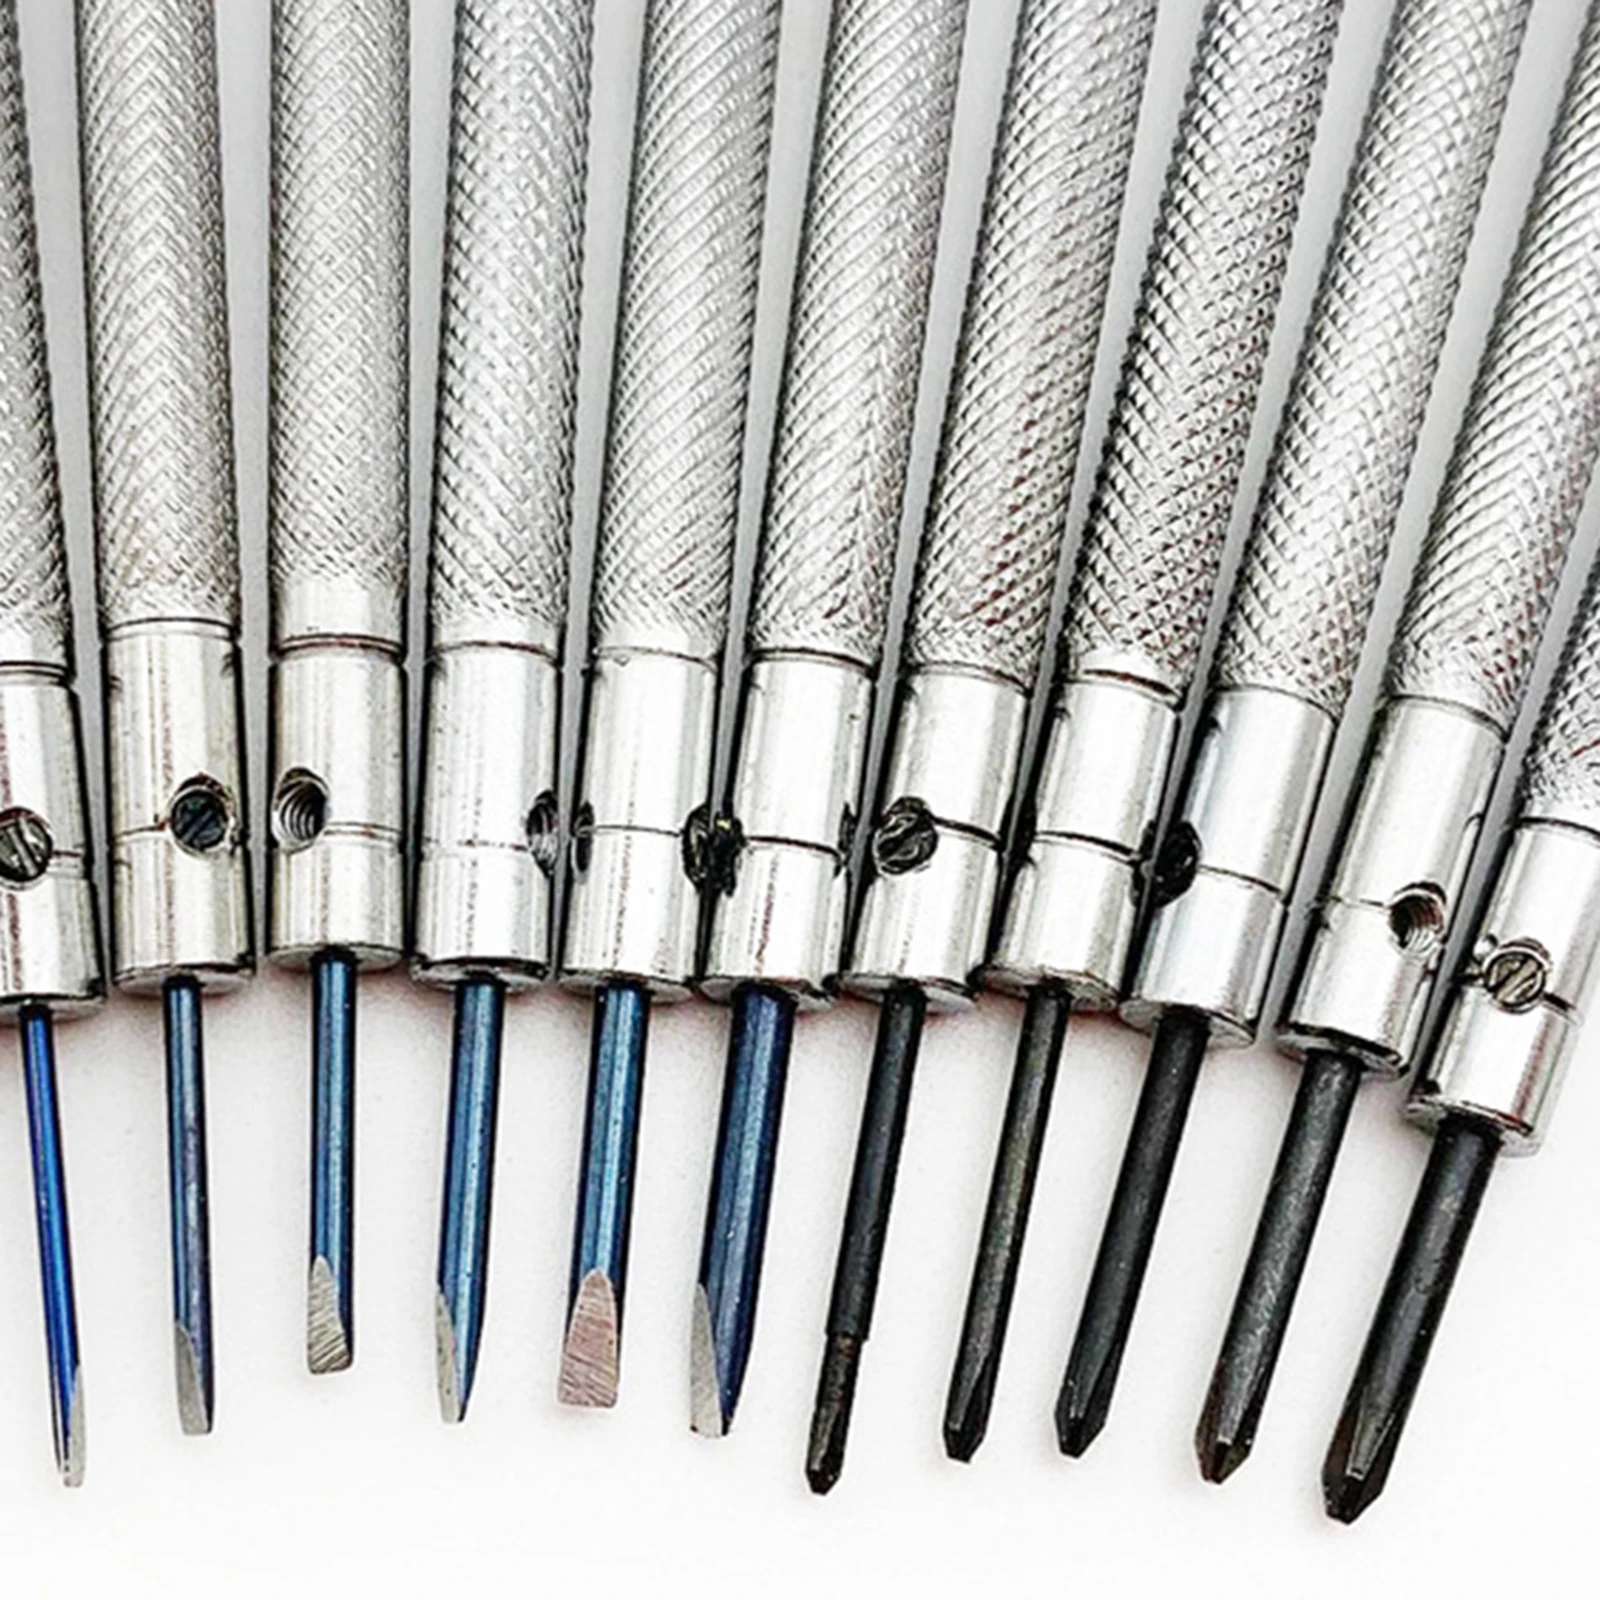 13 Pieces Watch Repair Screwdriver Set Tool 0.6mm-2.0mm for Jewelry